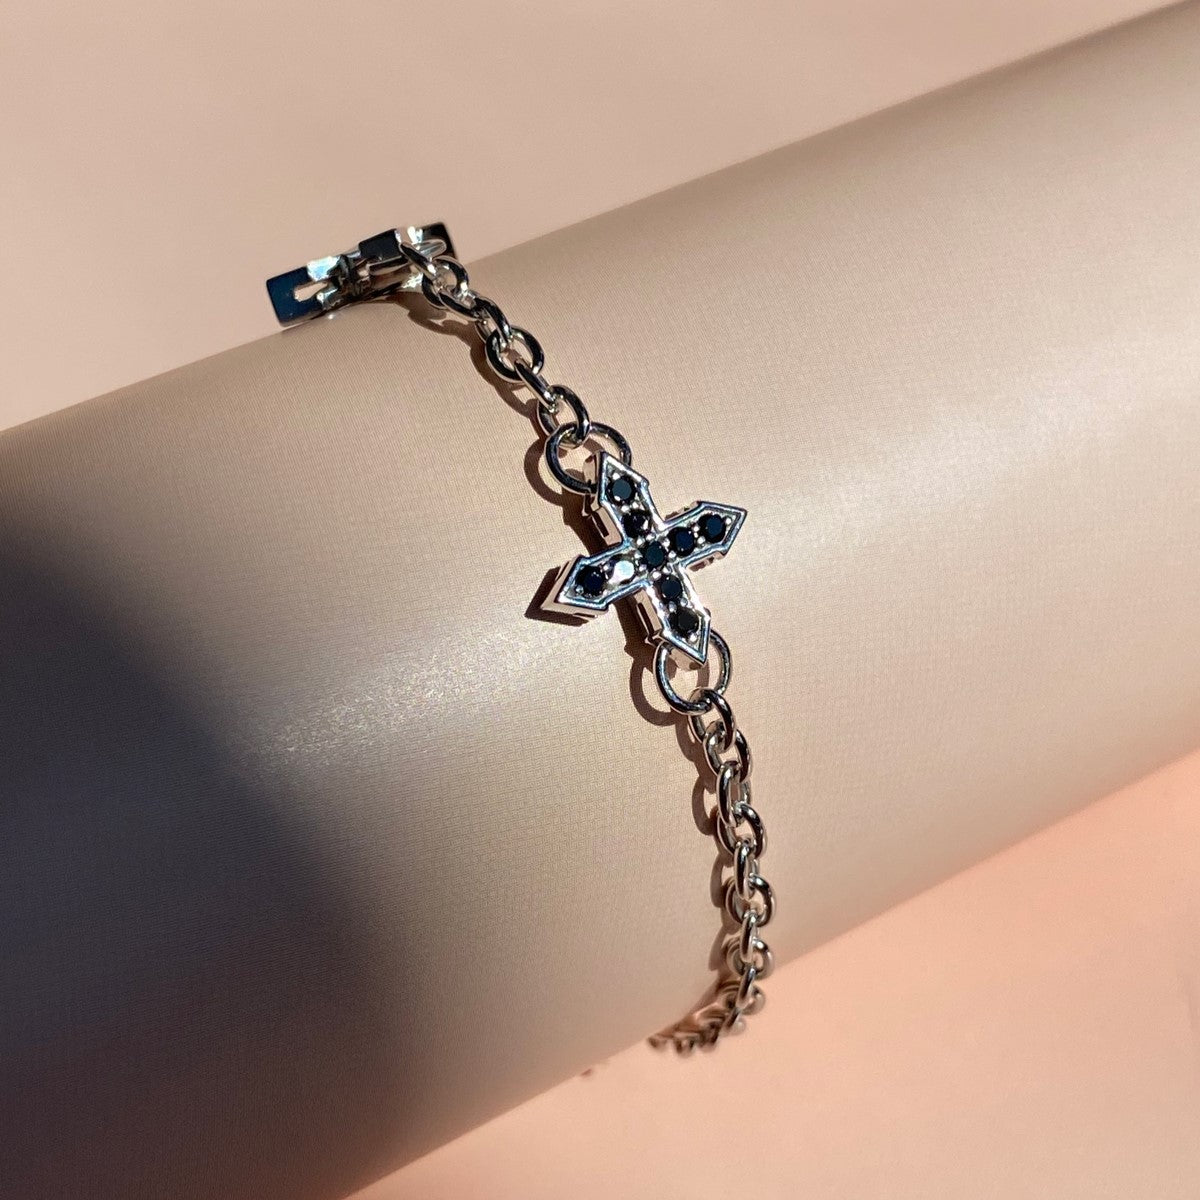 CHAIN BRACELET "TWO STARS "GLOW" WITH BLACK SPINEL / SILVER